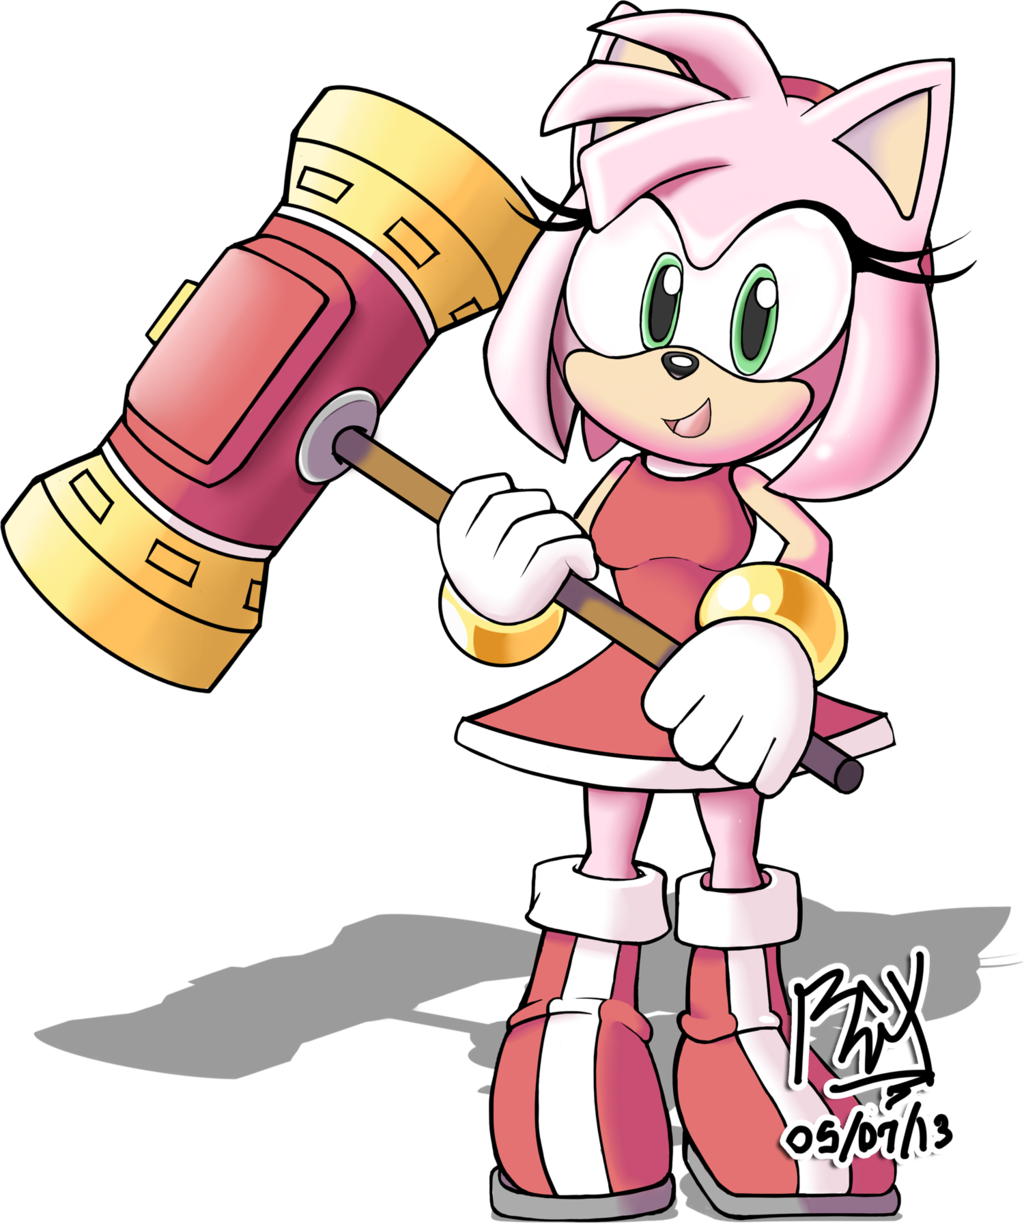 Amy Rose And Piko Piko Hammer By Rgxsupersonic - Amy Rose Hammer.